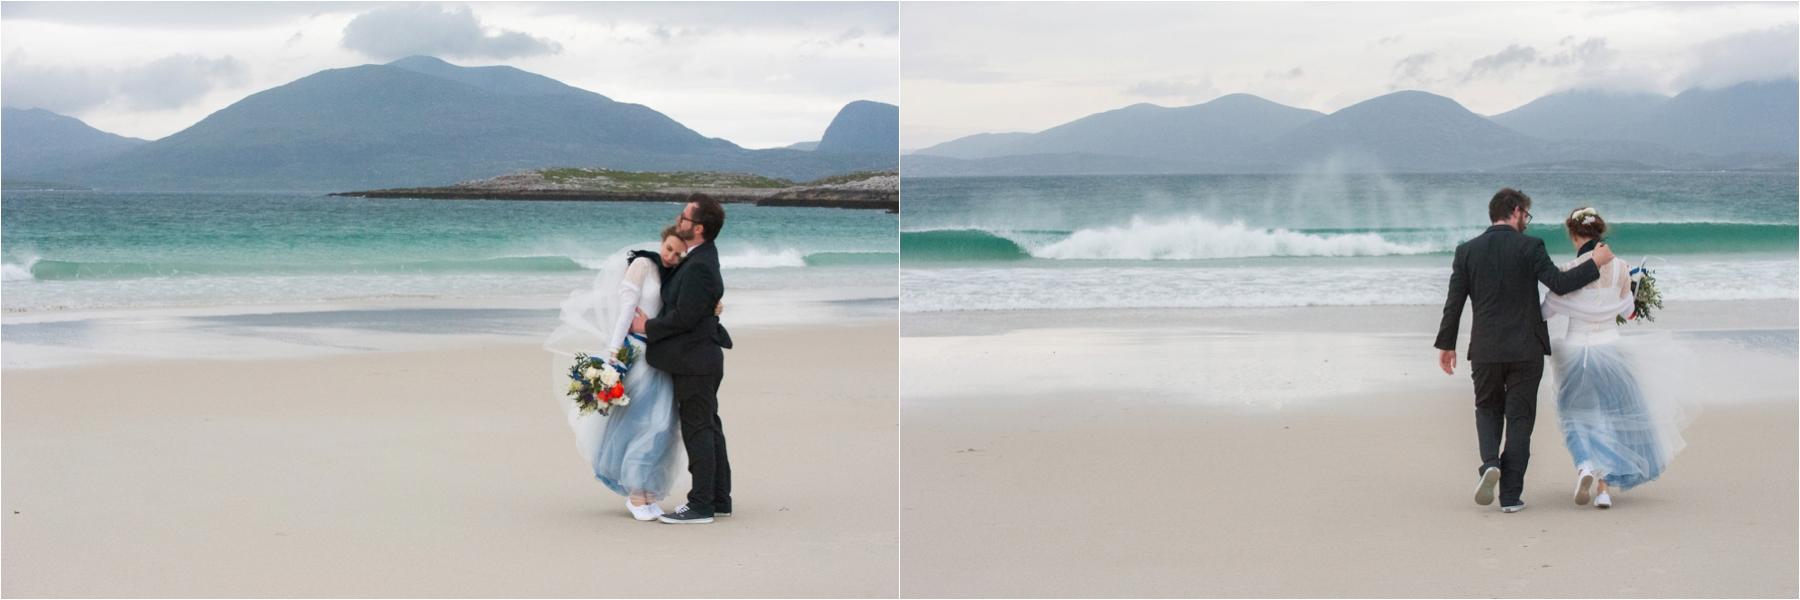 Beach wedding ceremony in the Scottish Highlands: elope to the Isle of Harris in the Outer Hebrides, with its blue-green water and quiet beaches. 